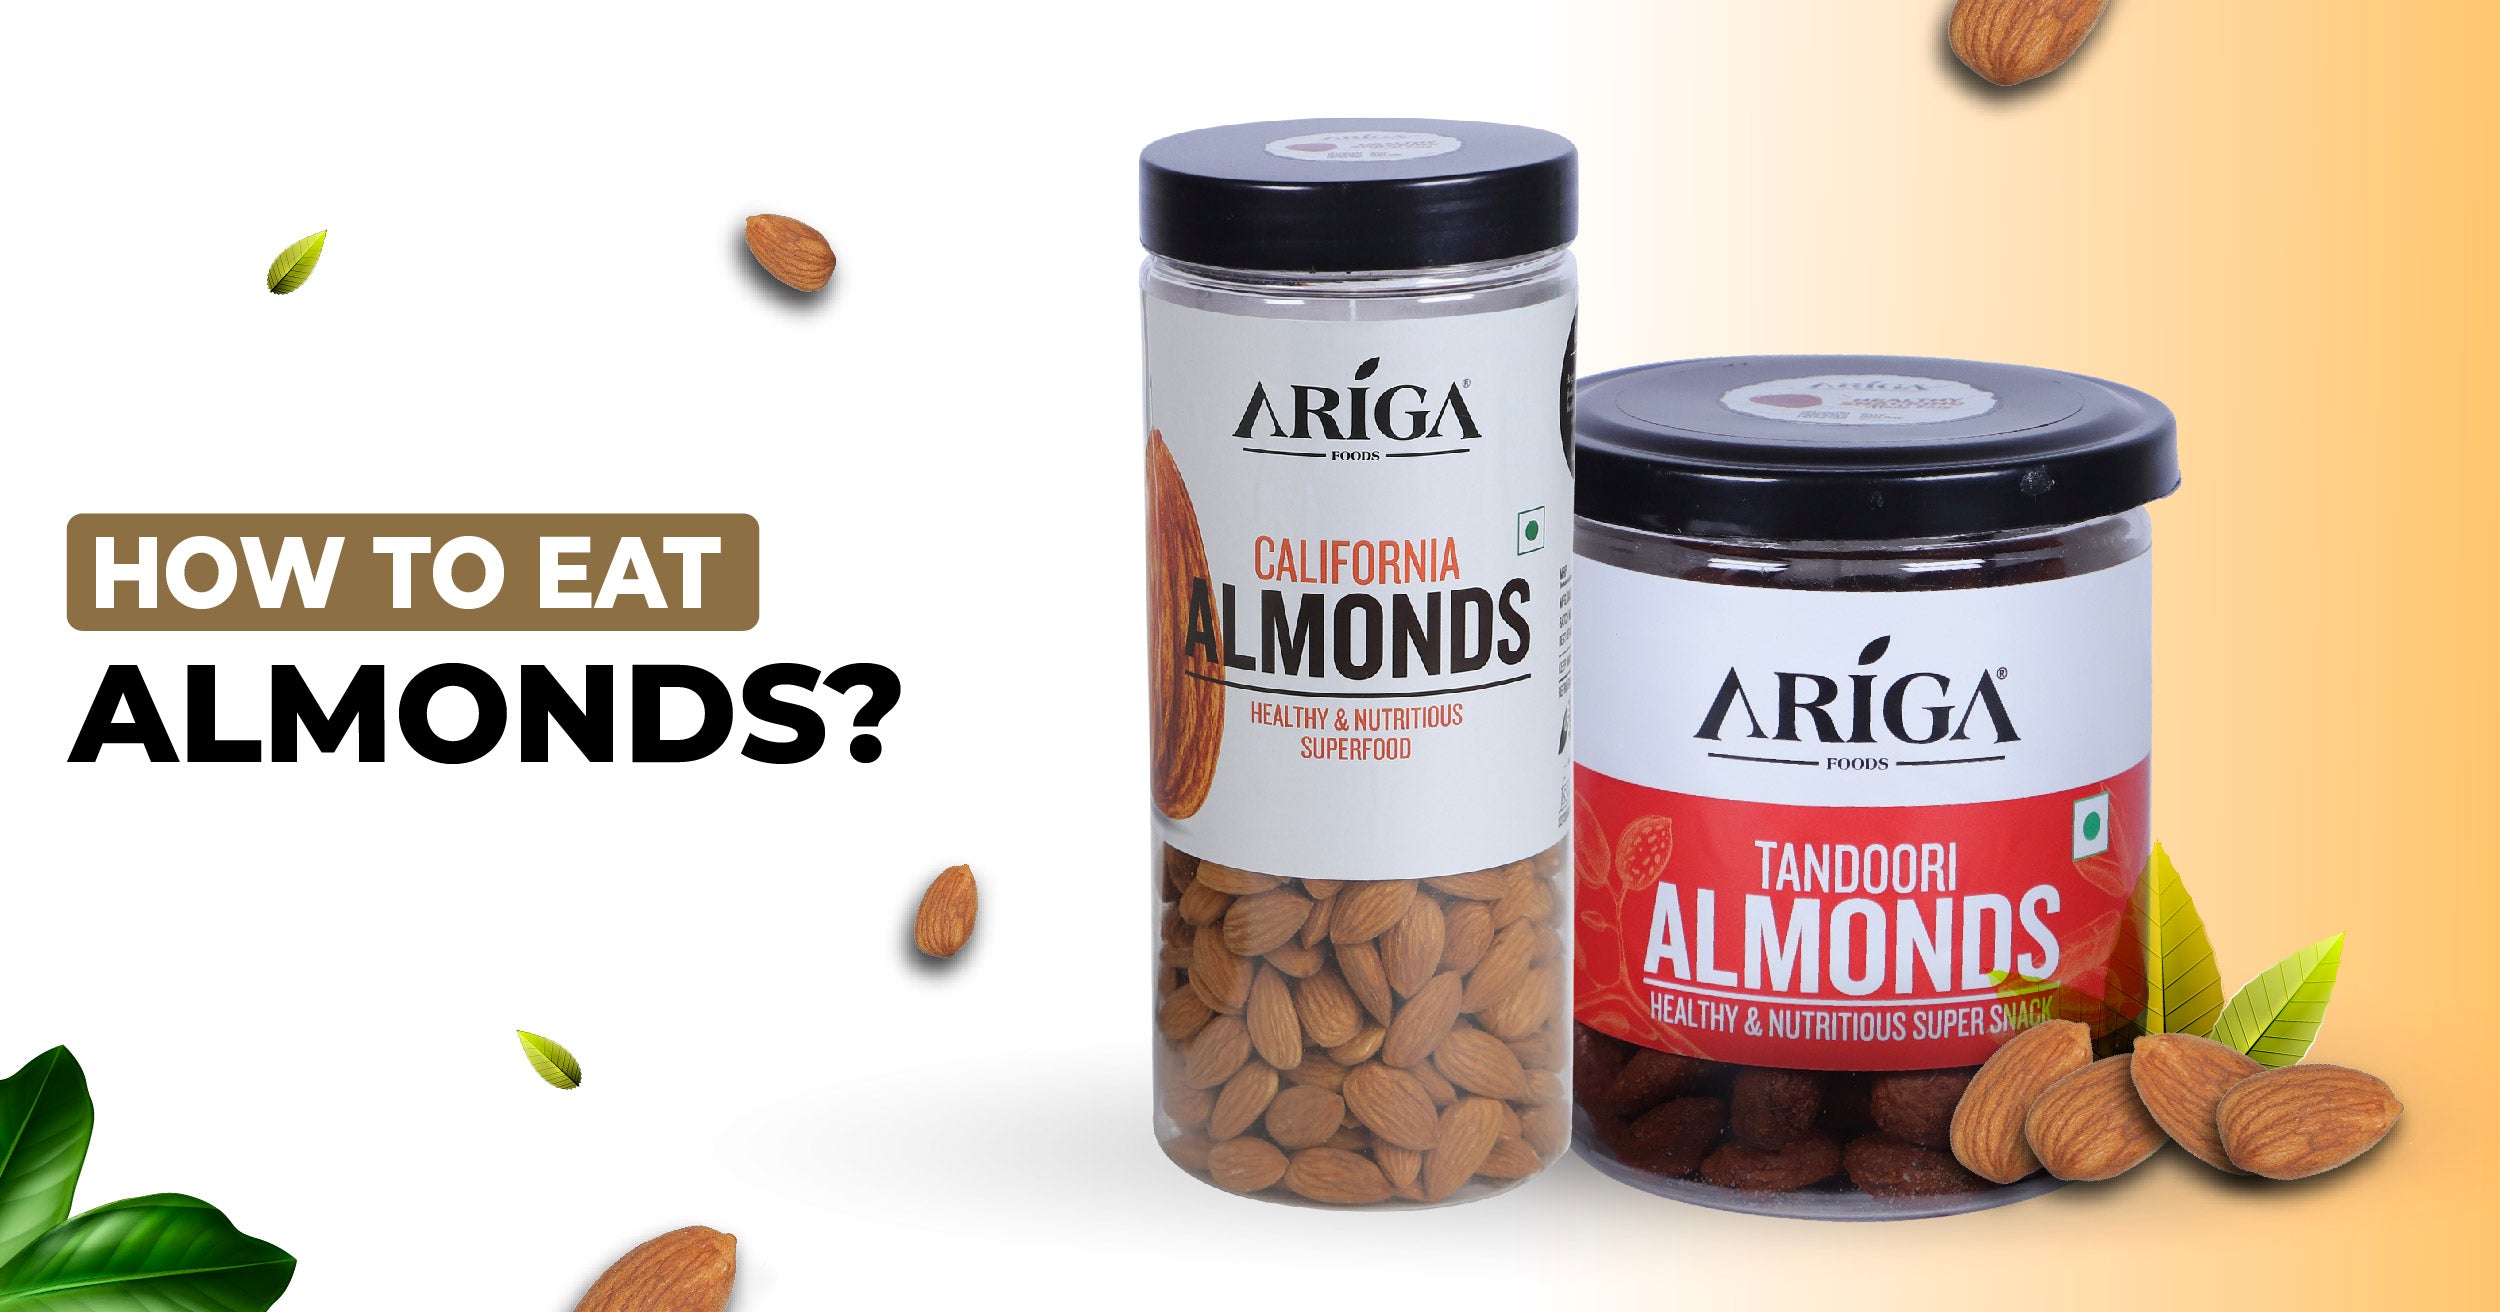 How to Eat Almonds?